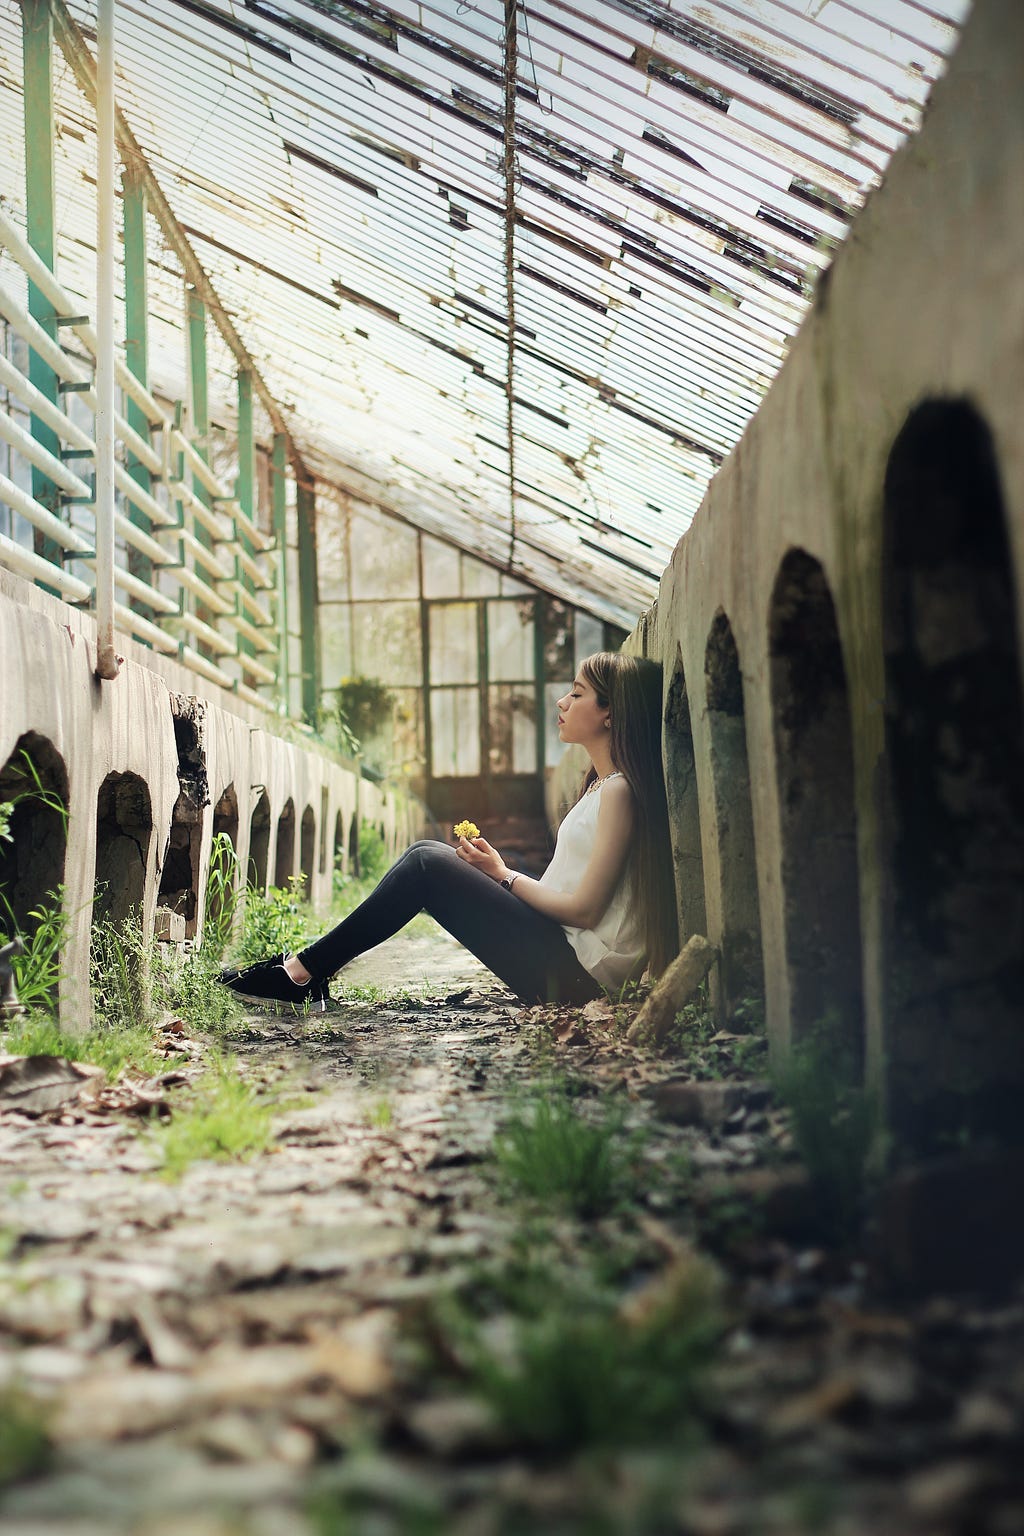 Girl sitting on the ground between buildings